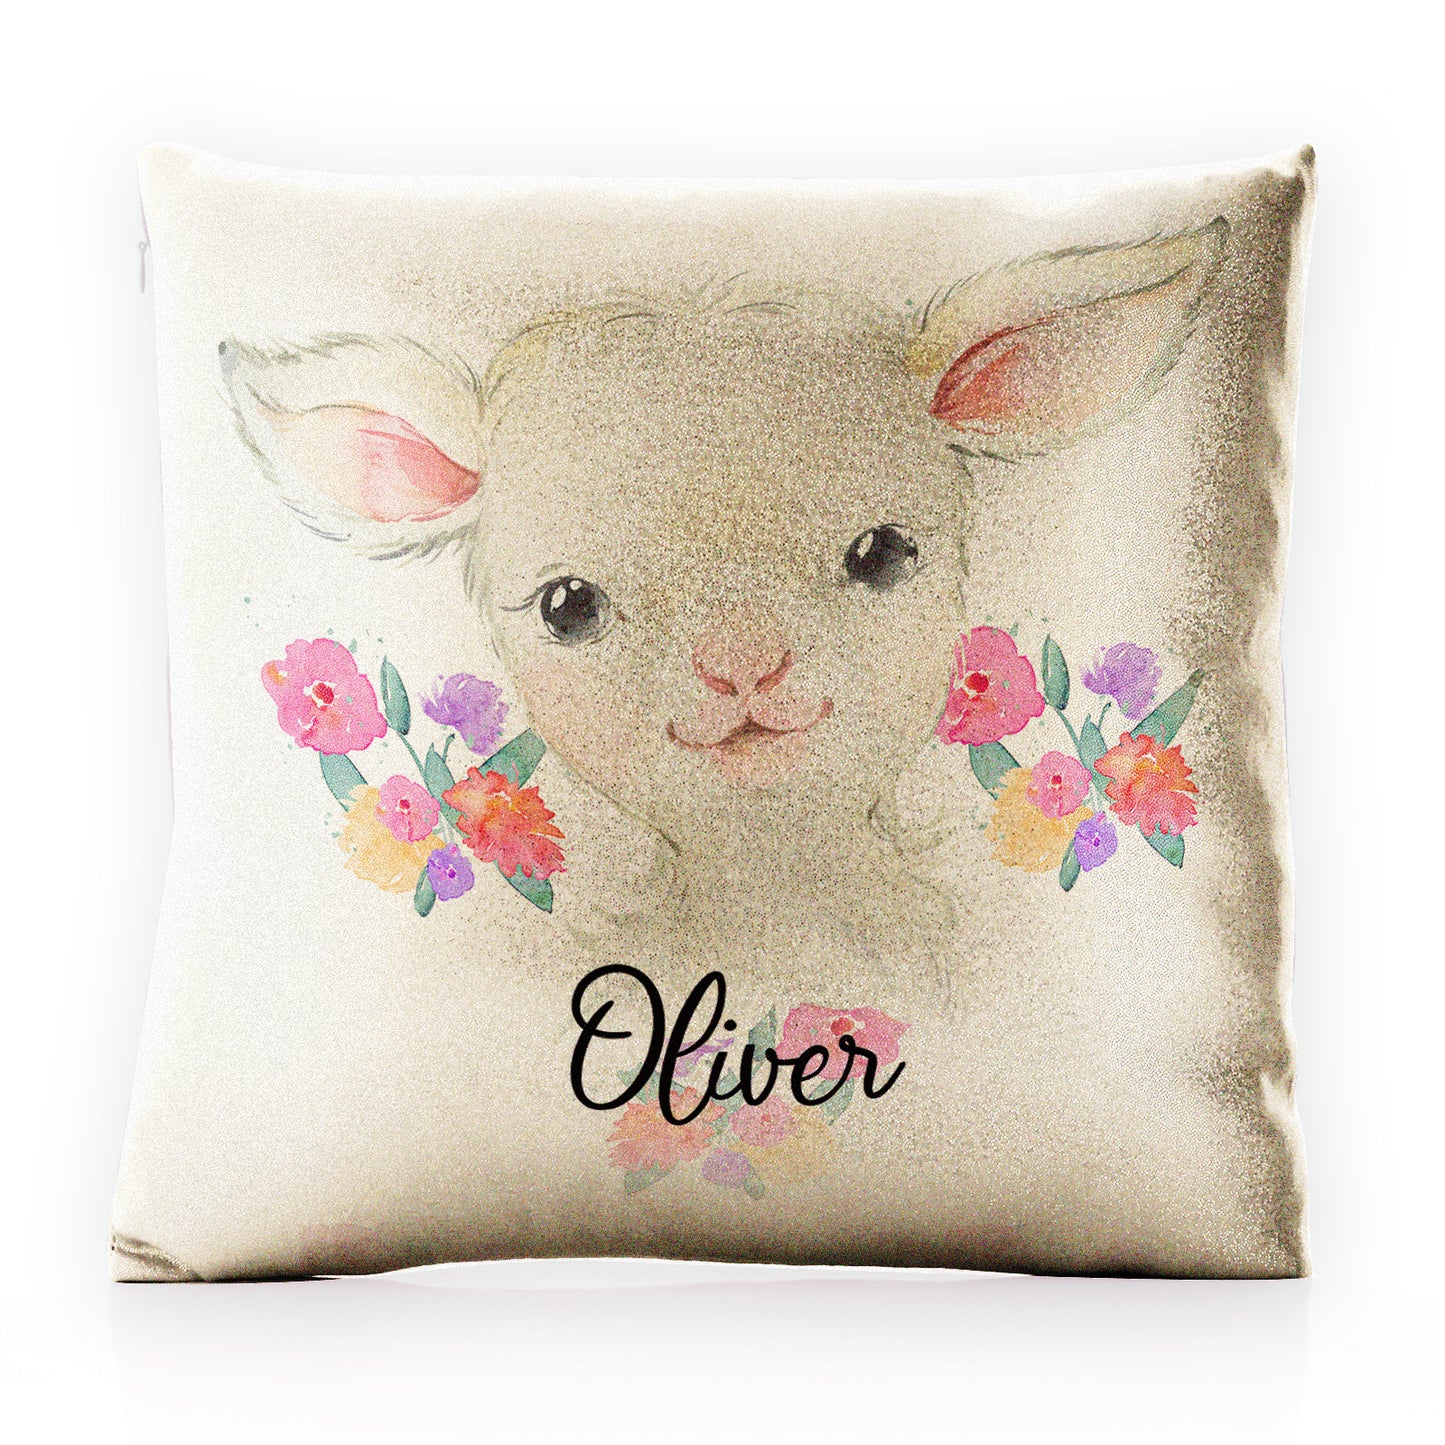 Personalised Glitter Cushion with White Lamb Flowers and Cute Text